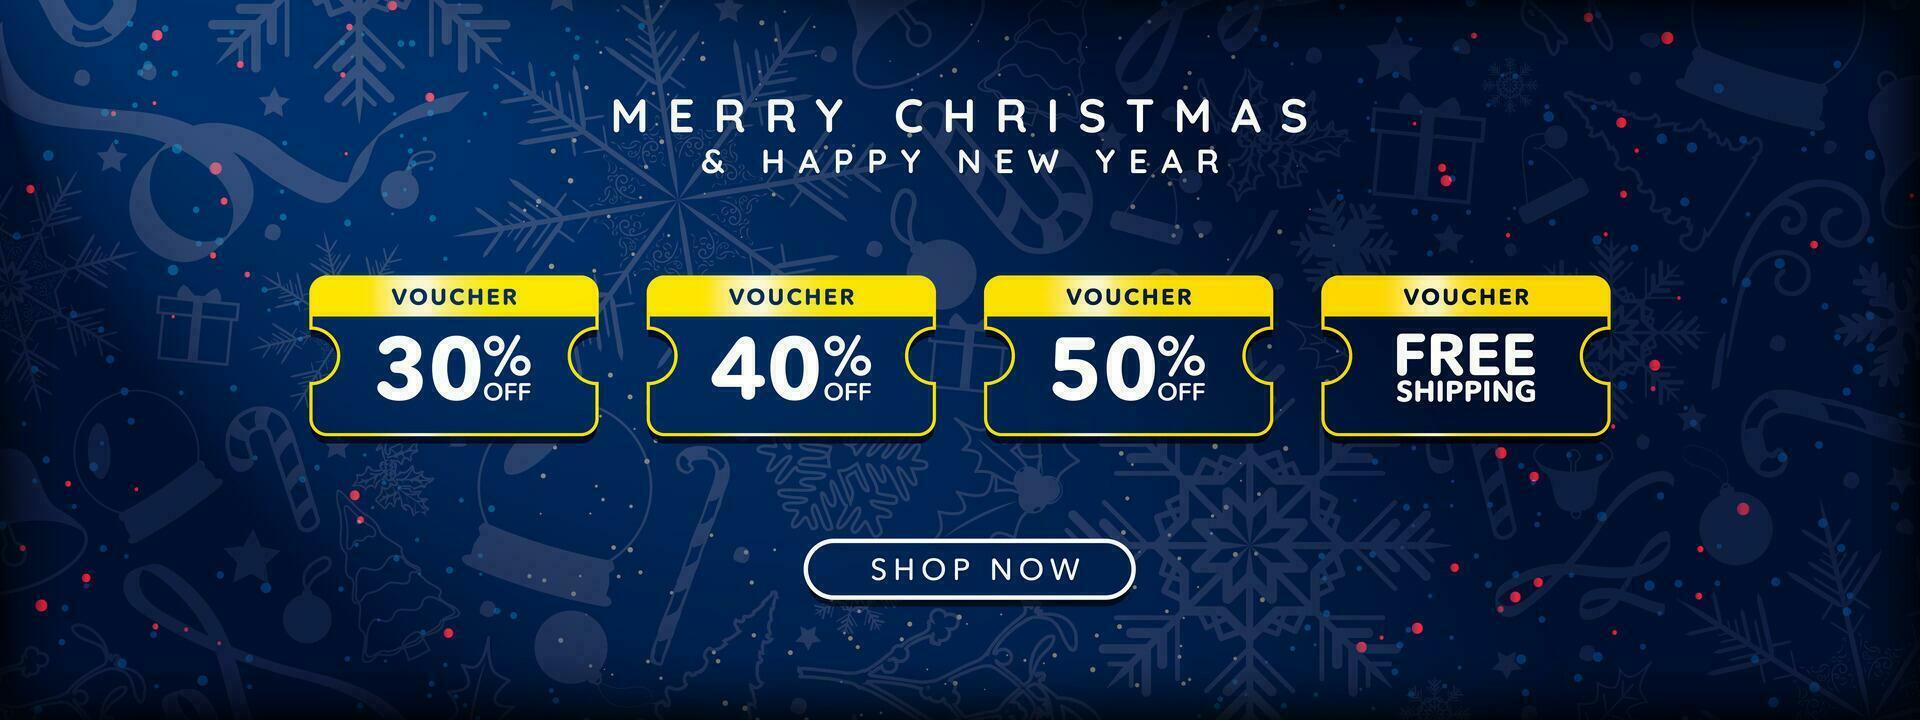 Gold and Blue Online Christmas Voucher on decorative christmas banner with shop now CTA button. Bundle of online coupons with price discount and free shipping delivery. Vector Illustration. EPS 10